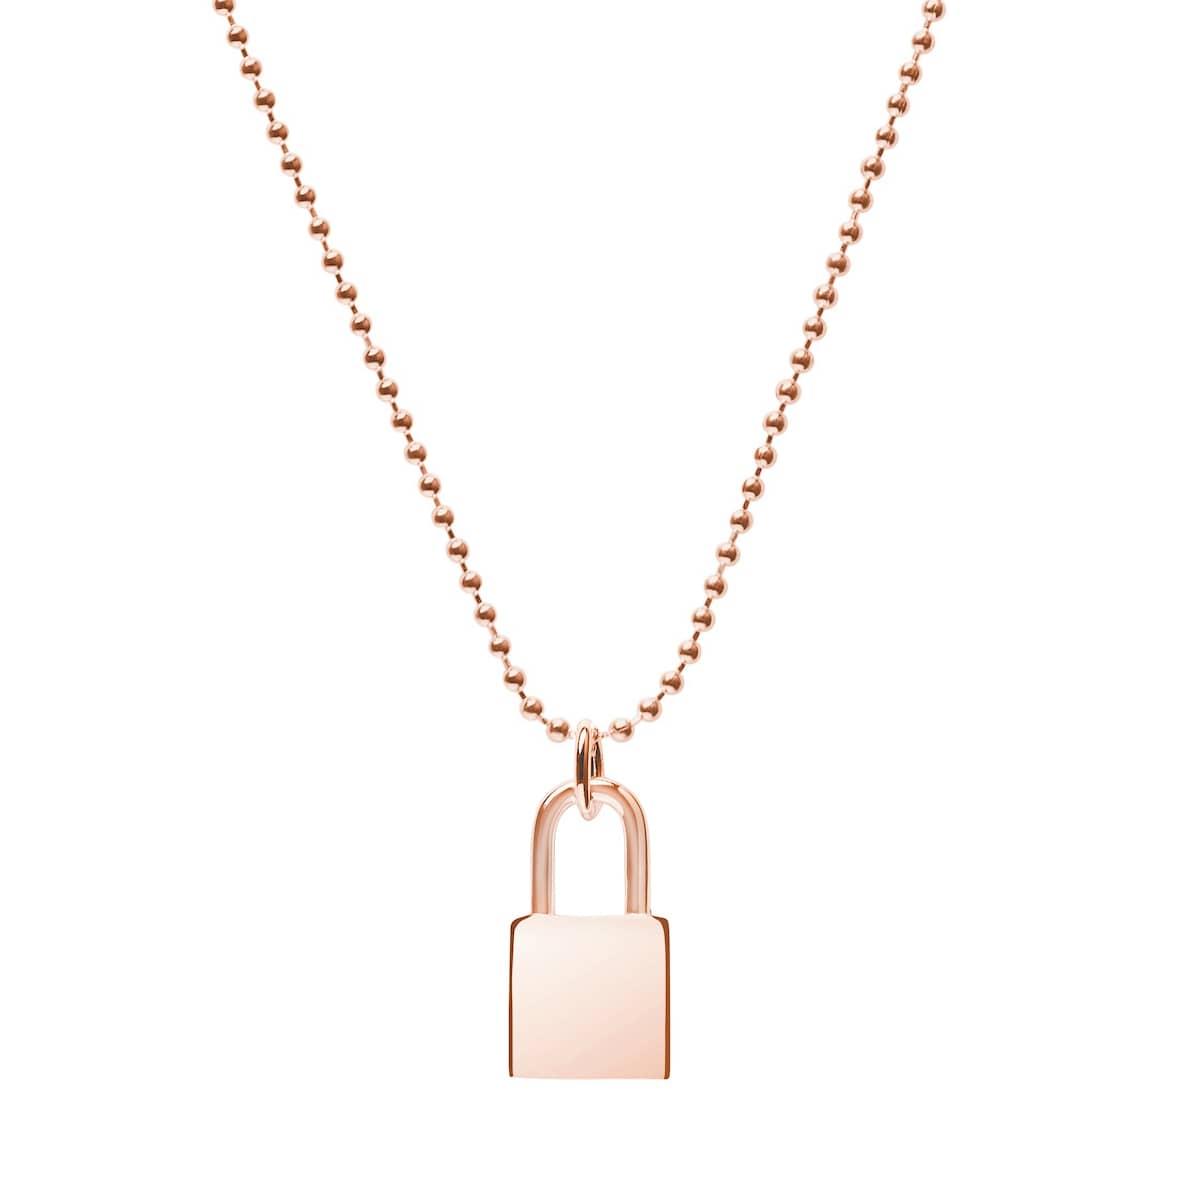 rose gold lock necklace with ball chain